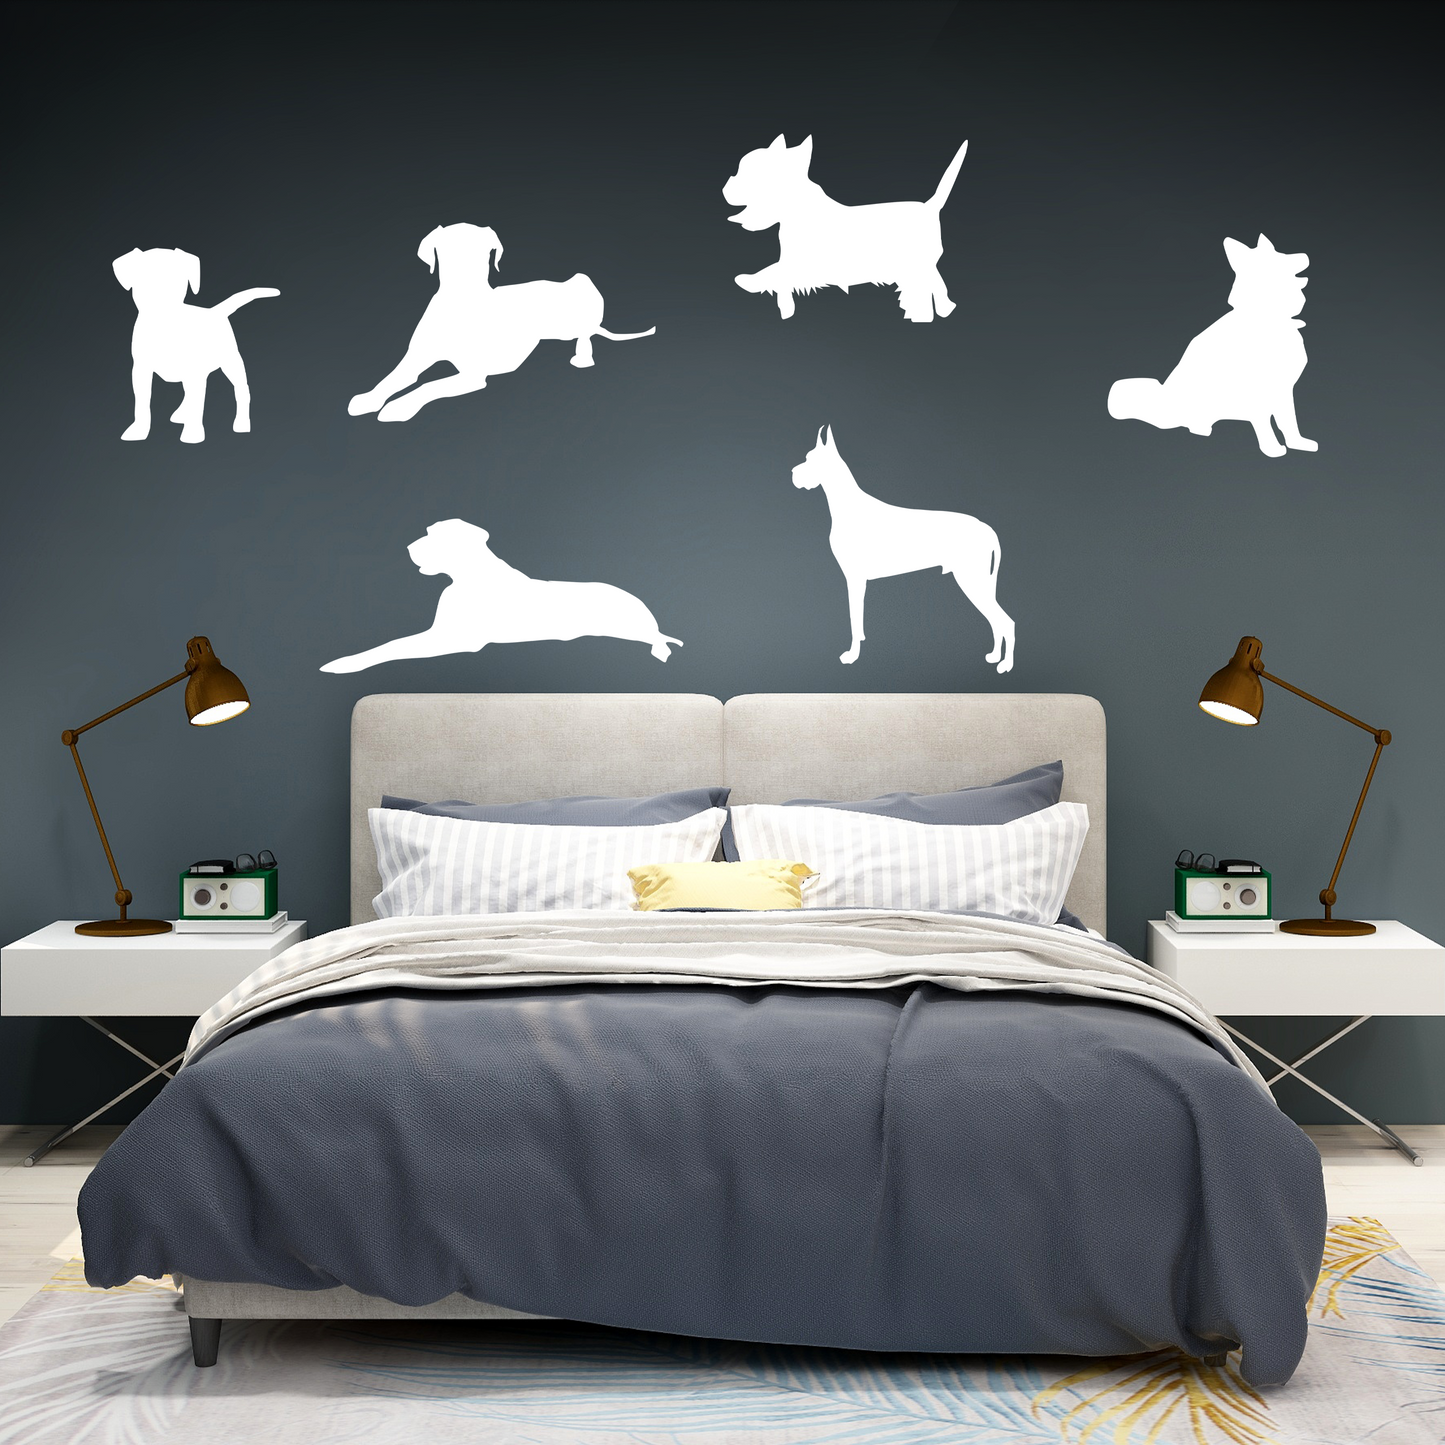 Dogs Wall Decal